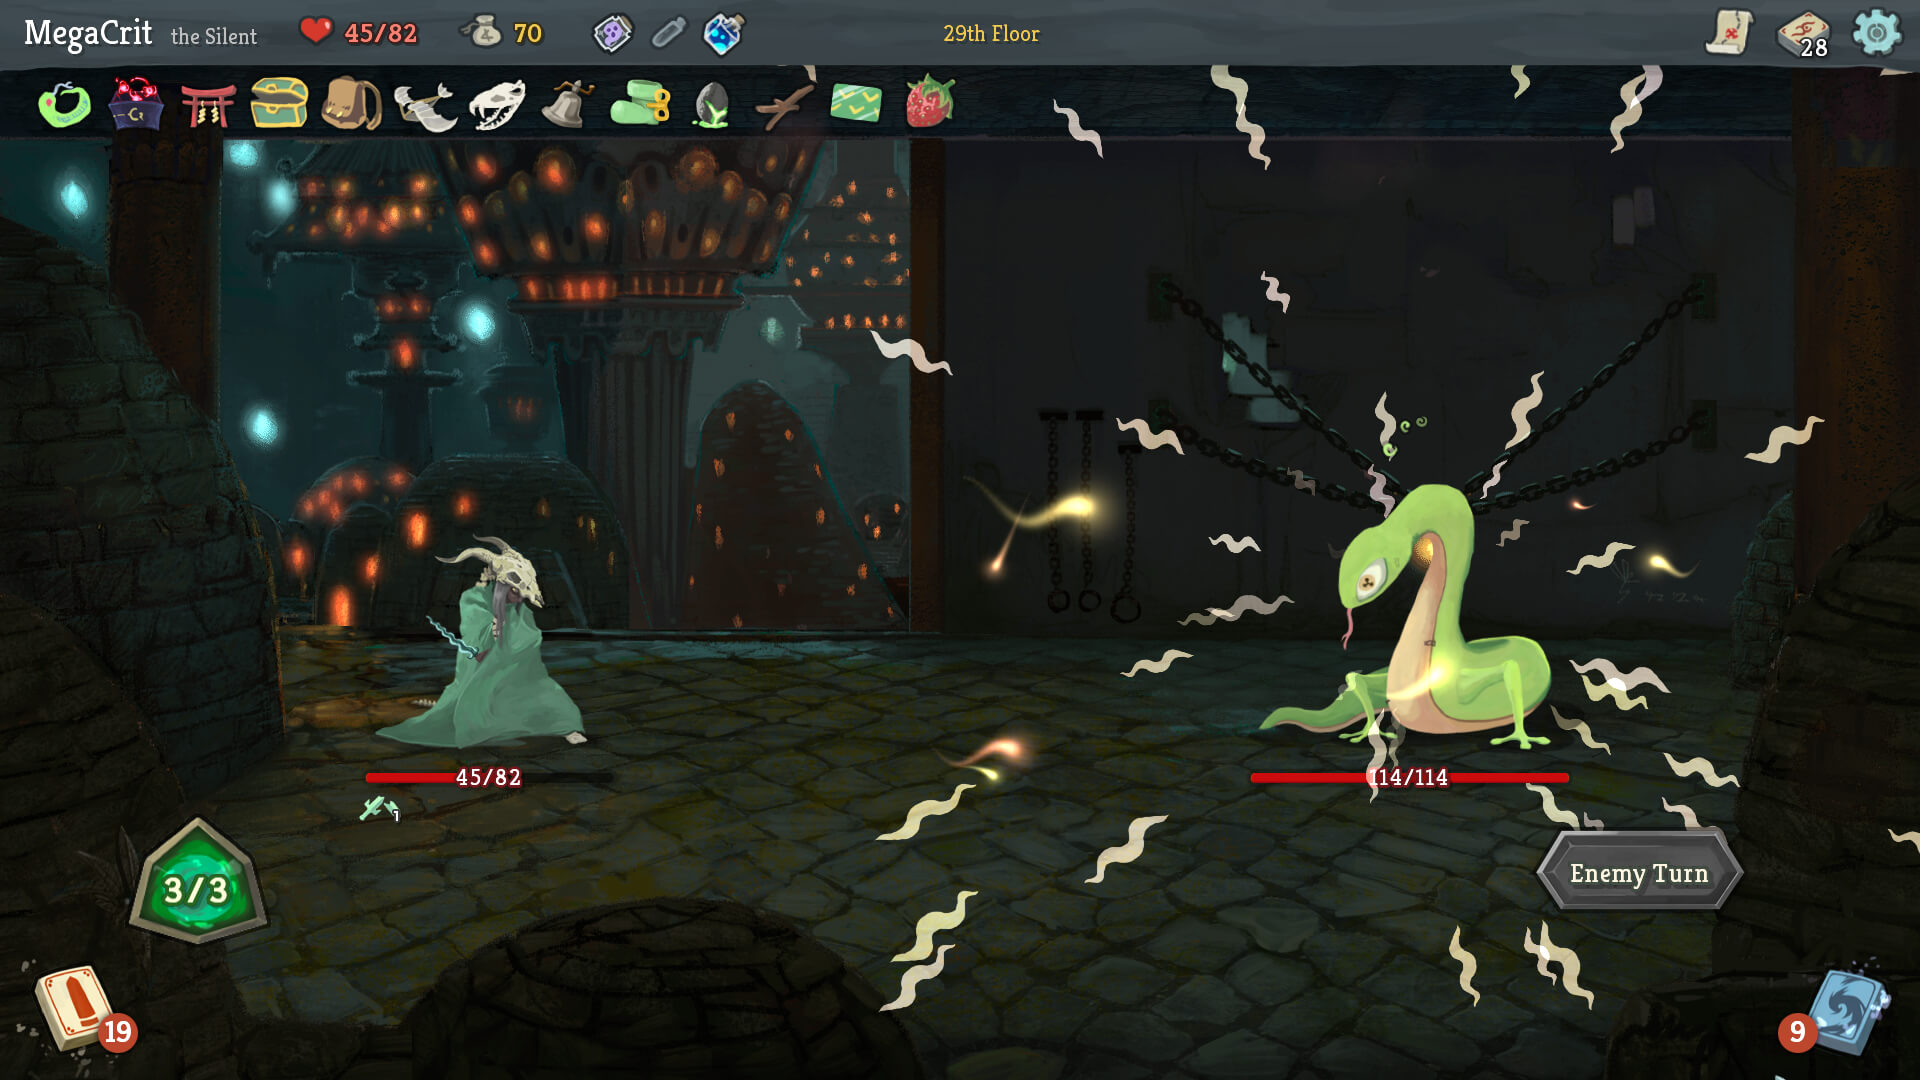 Slay the Spire Free Download